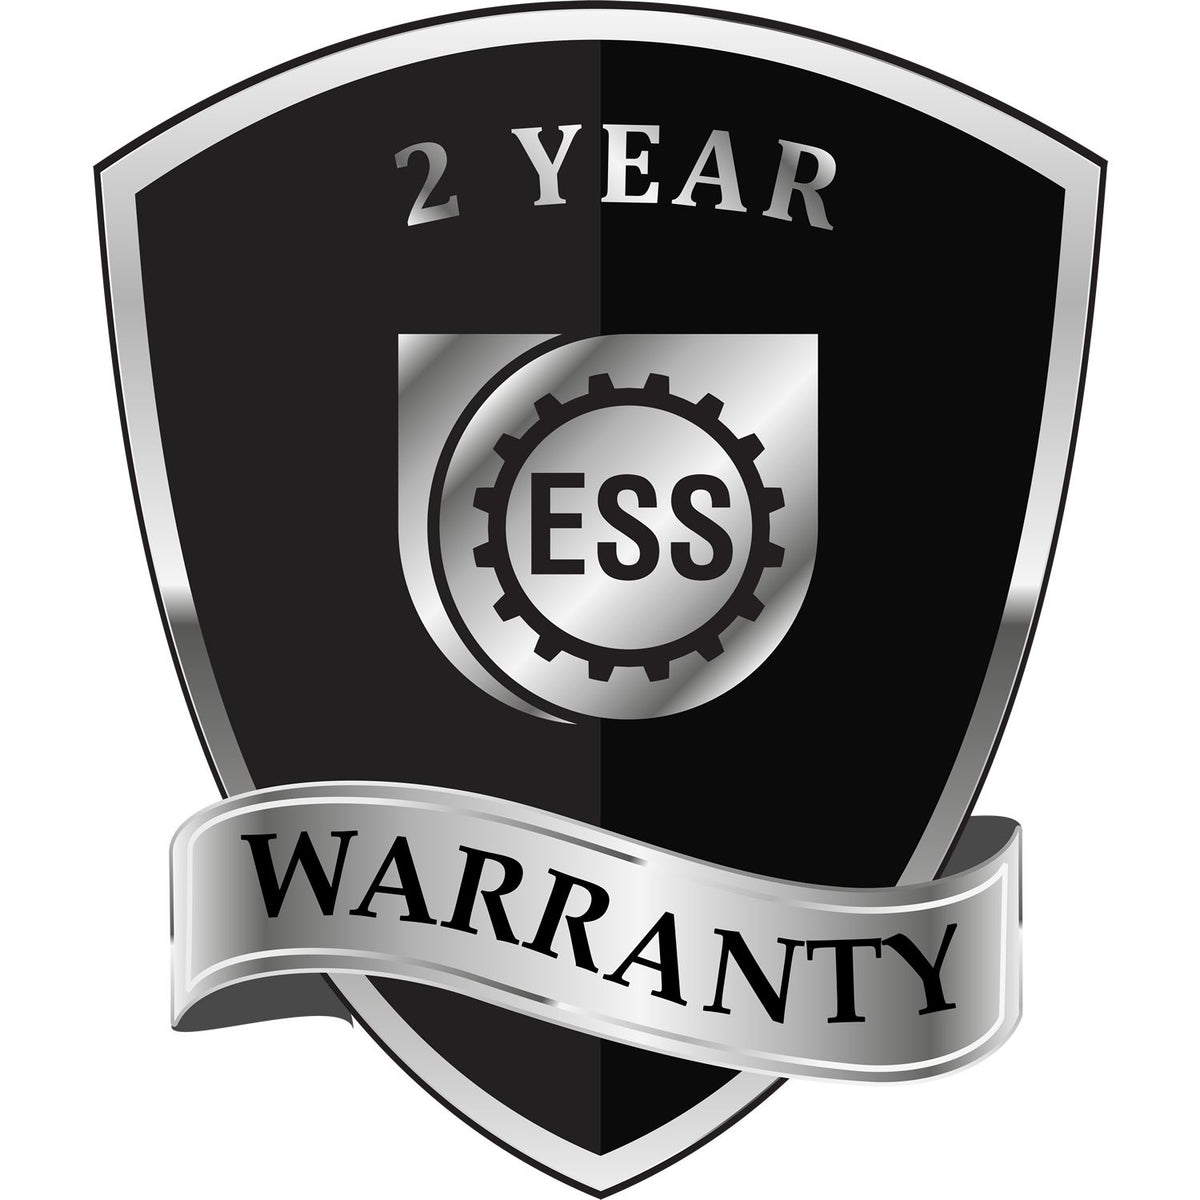 A black and silver badge or emblem showing warranty information for the Hybrid Illinois Landscape Architect Seal